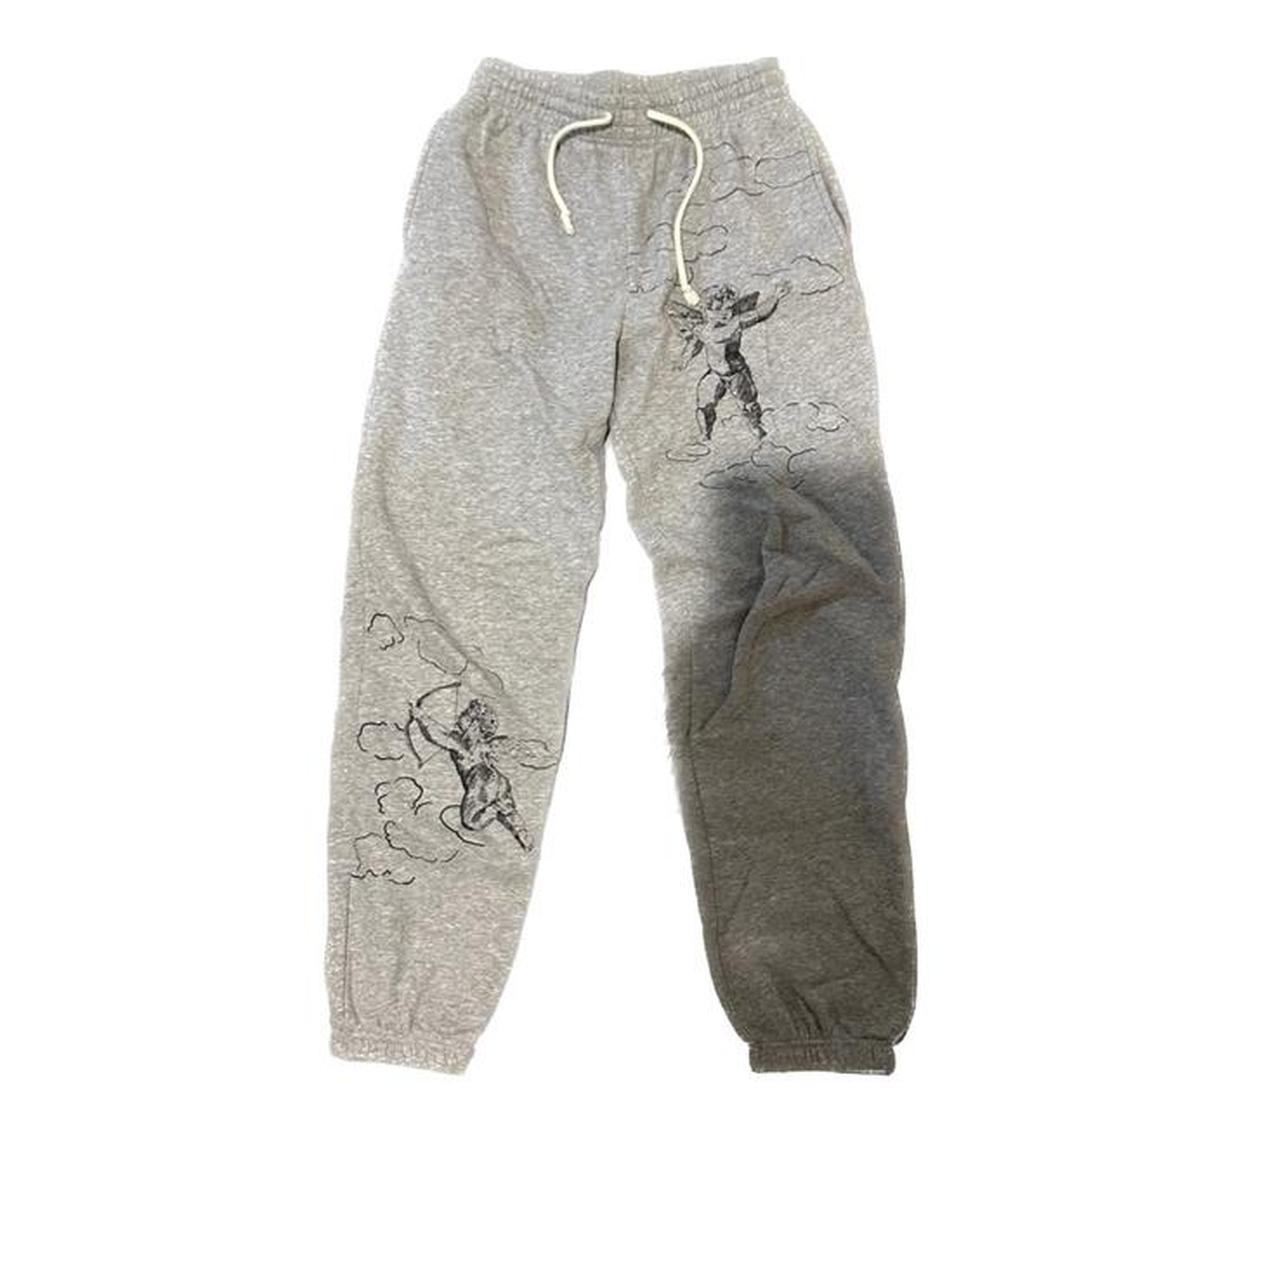 Urban Outfitters La Patch Drawstring Sweatpant in Gray